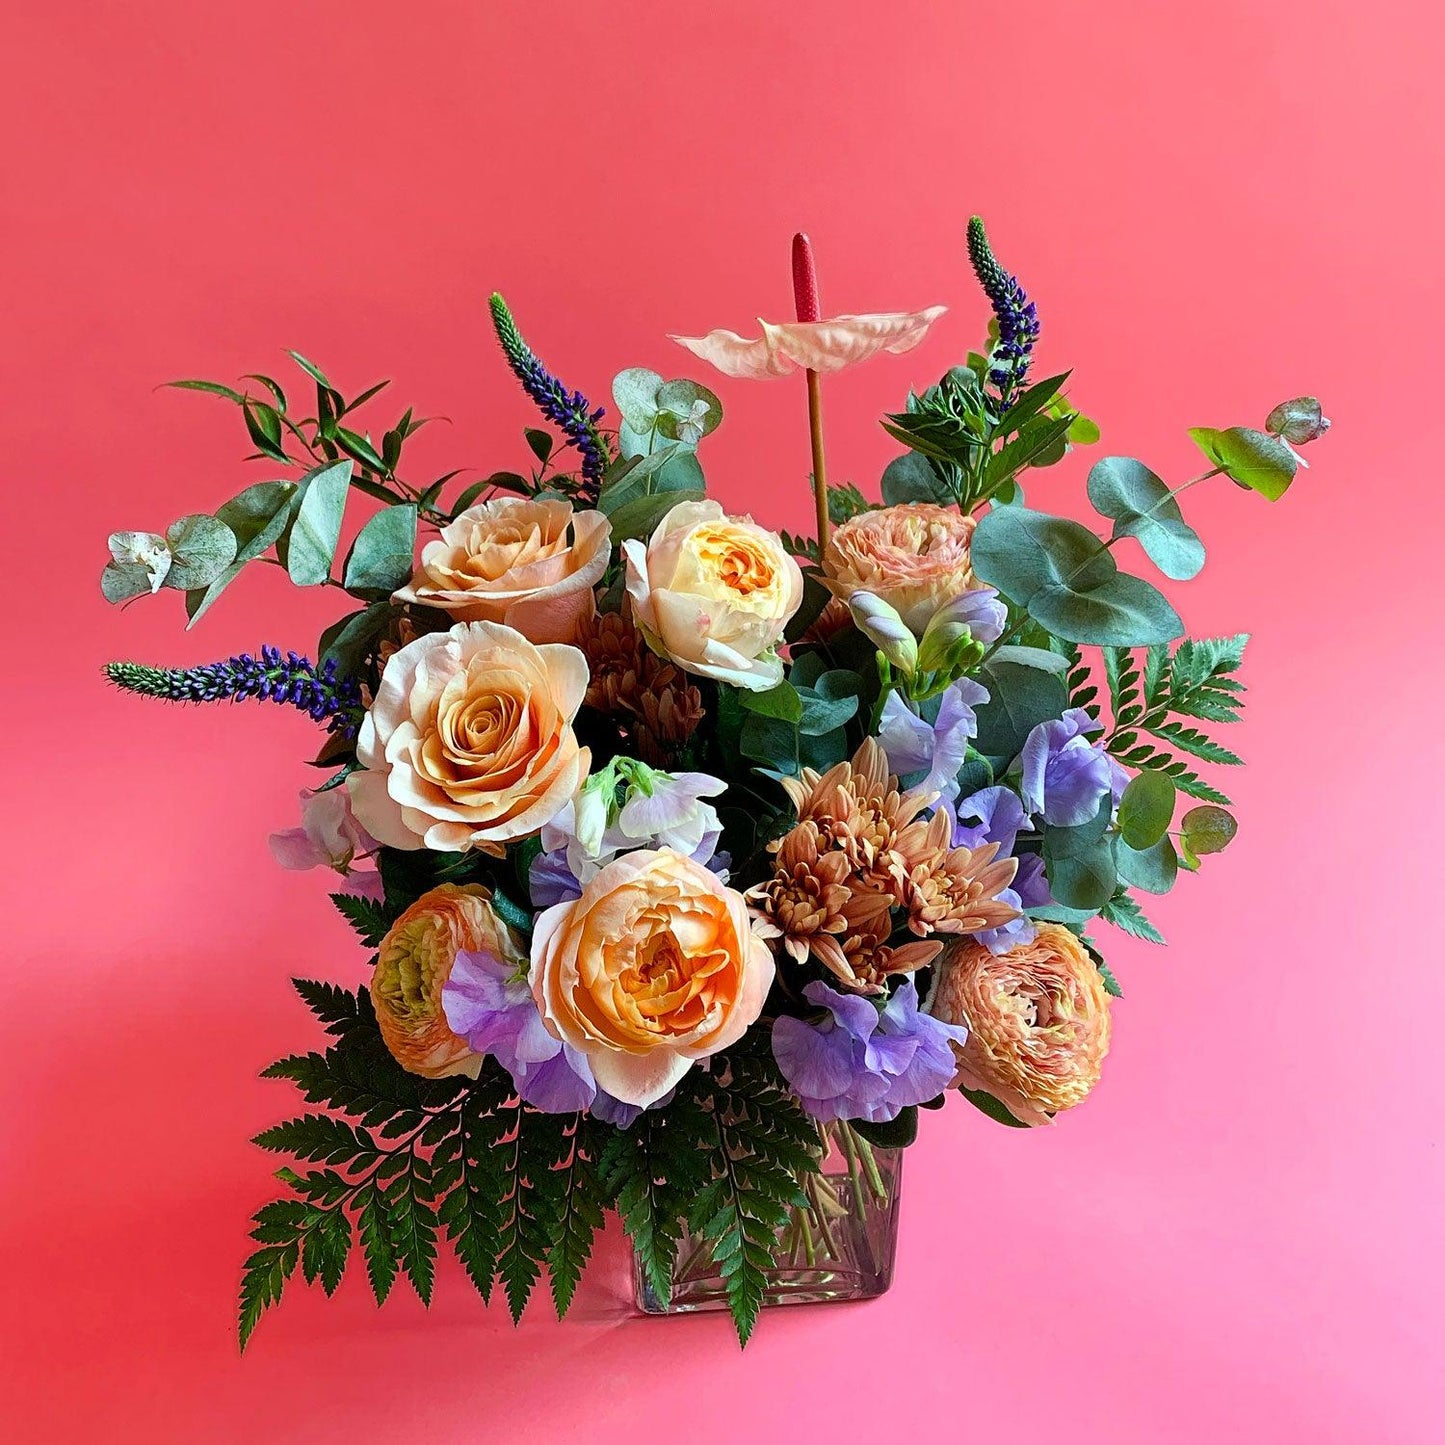 Image of a bouquet with sweet peach and apricot tones, deepening to lavender and blue, with a touch of foliage for freshness. Order online for same-day flower delivery from Toronto's best florist, available near you.